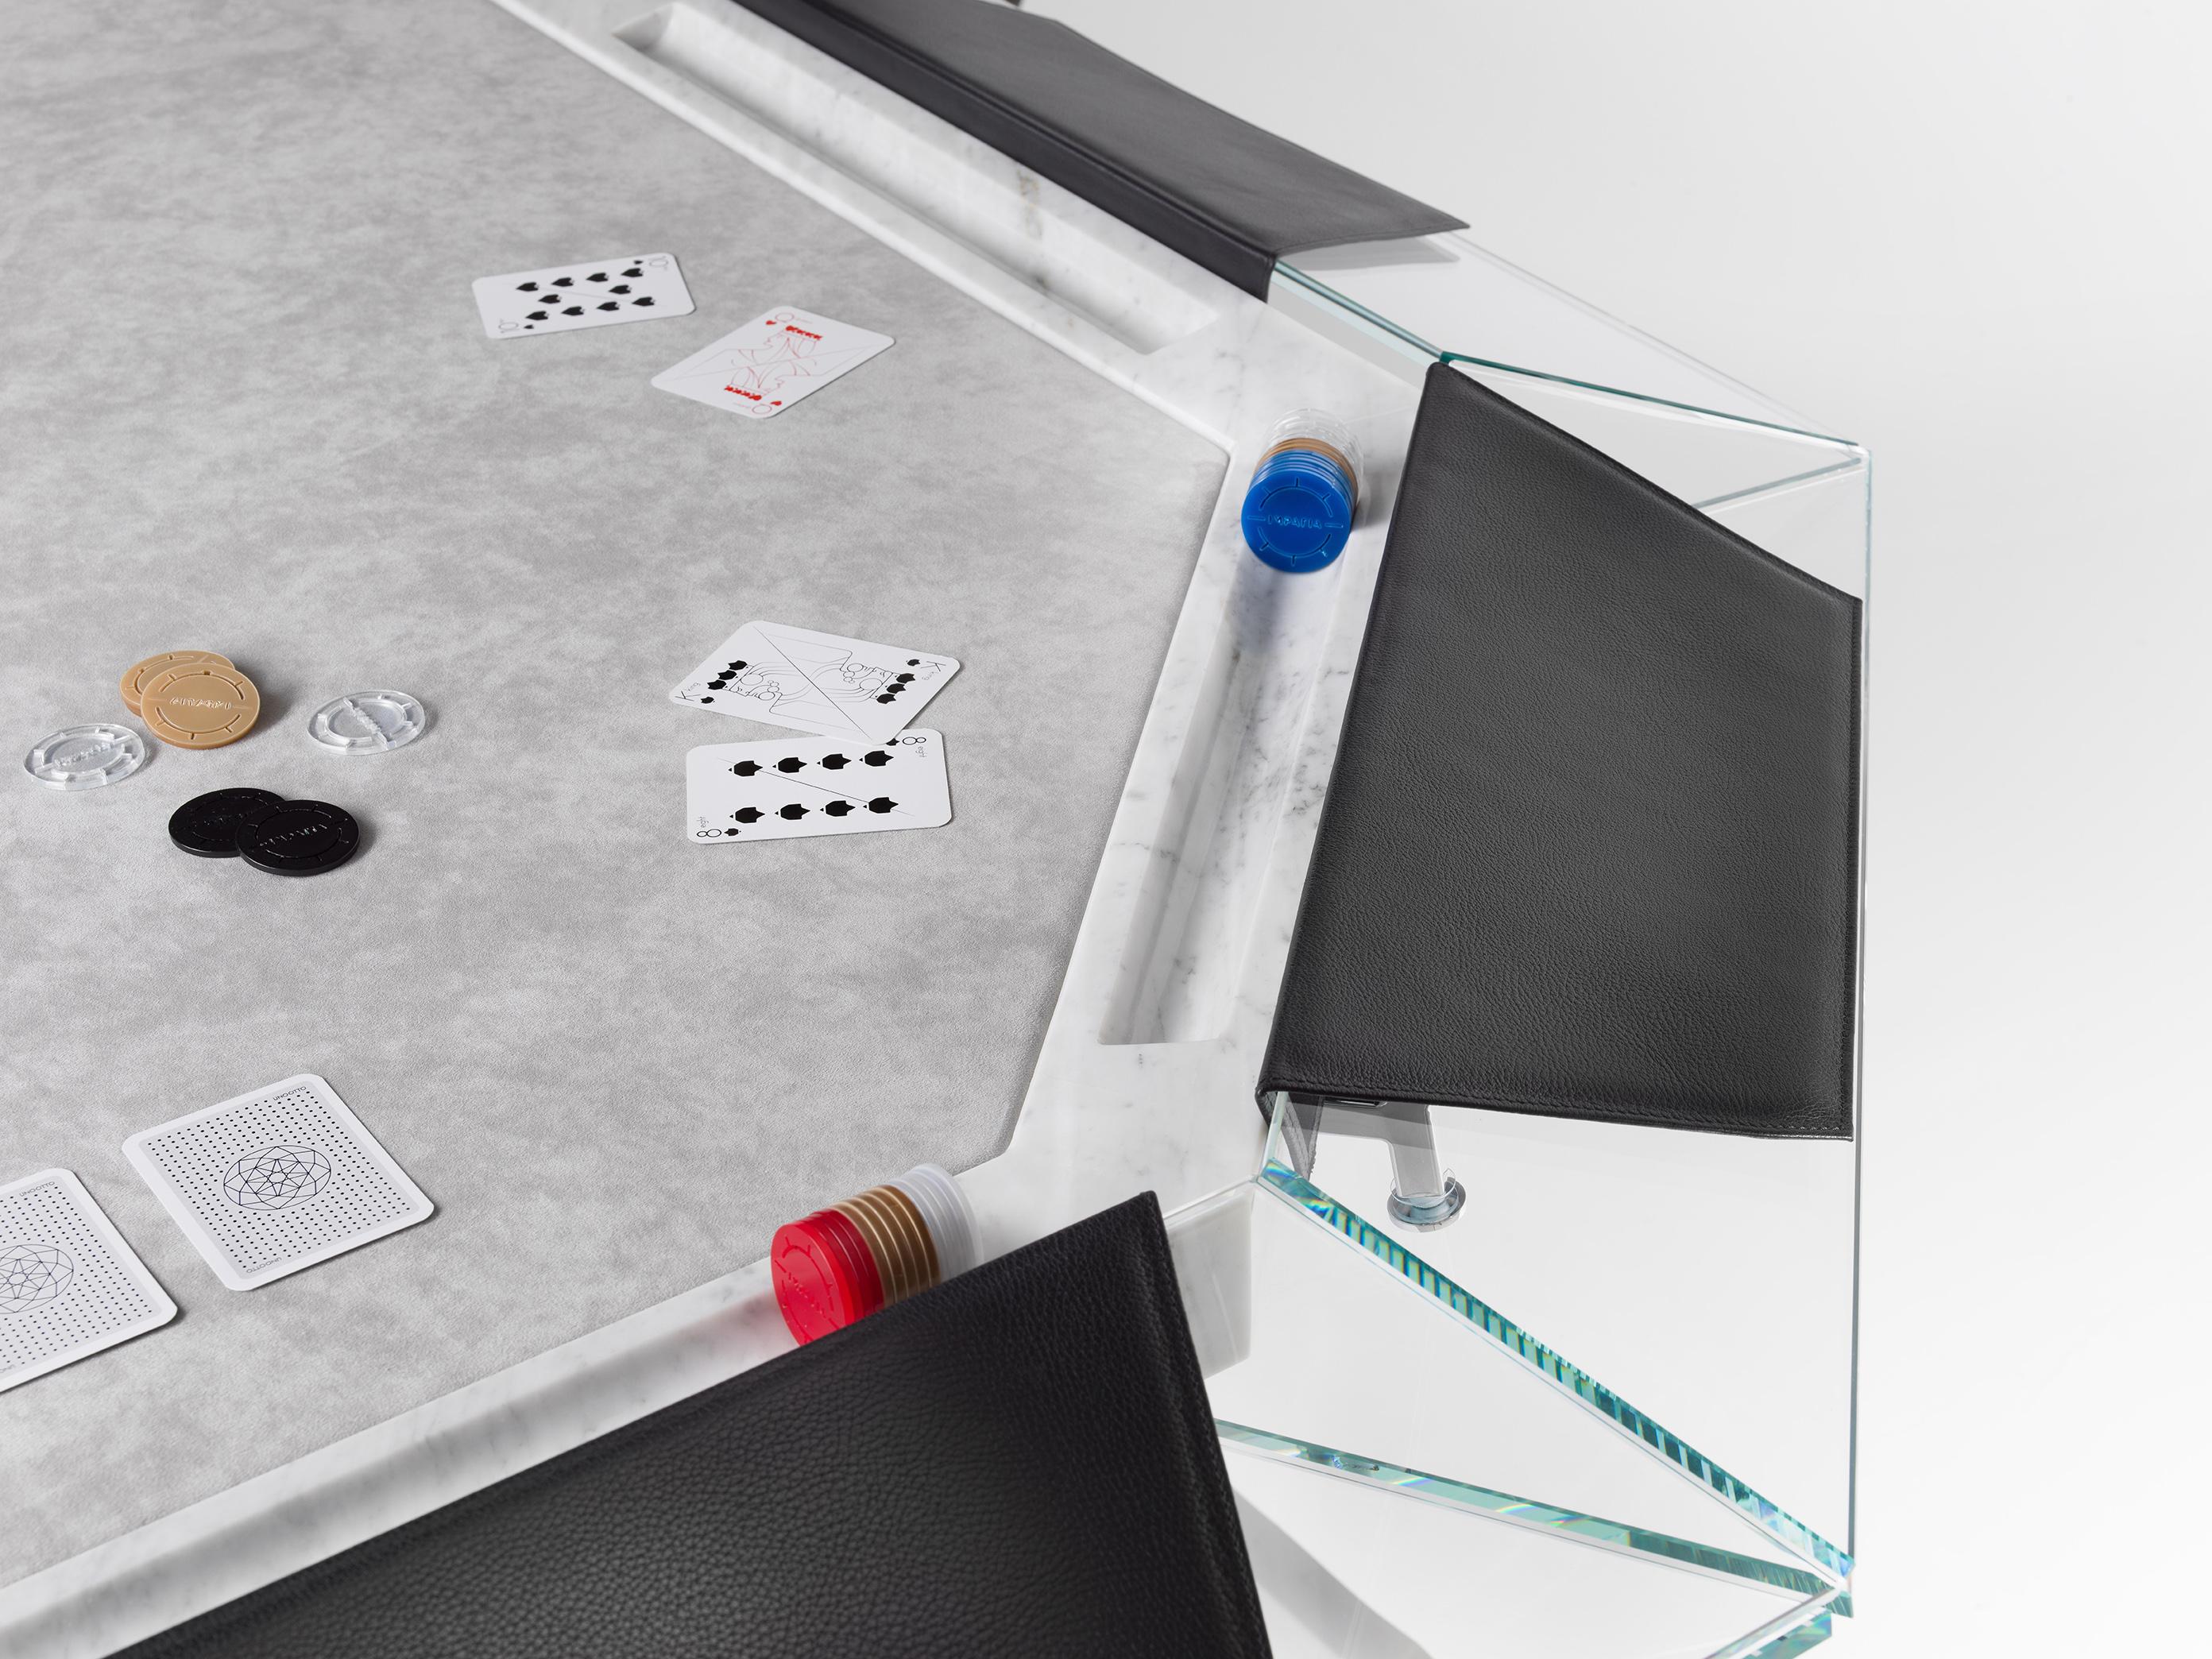 Unootto reinterprets the traditional professional poker table, making the A-game stylish and sophisticated.

This one-of-a-kind 10-player poker table features a unique low-iron glass top edge supported by an inner Italian marble top, finished with